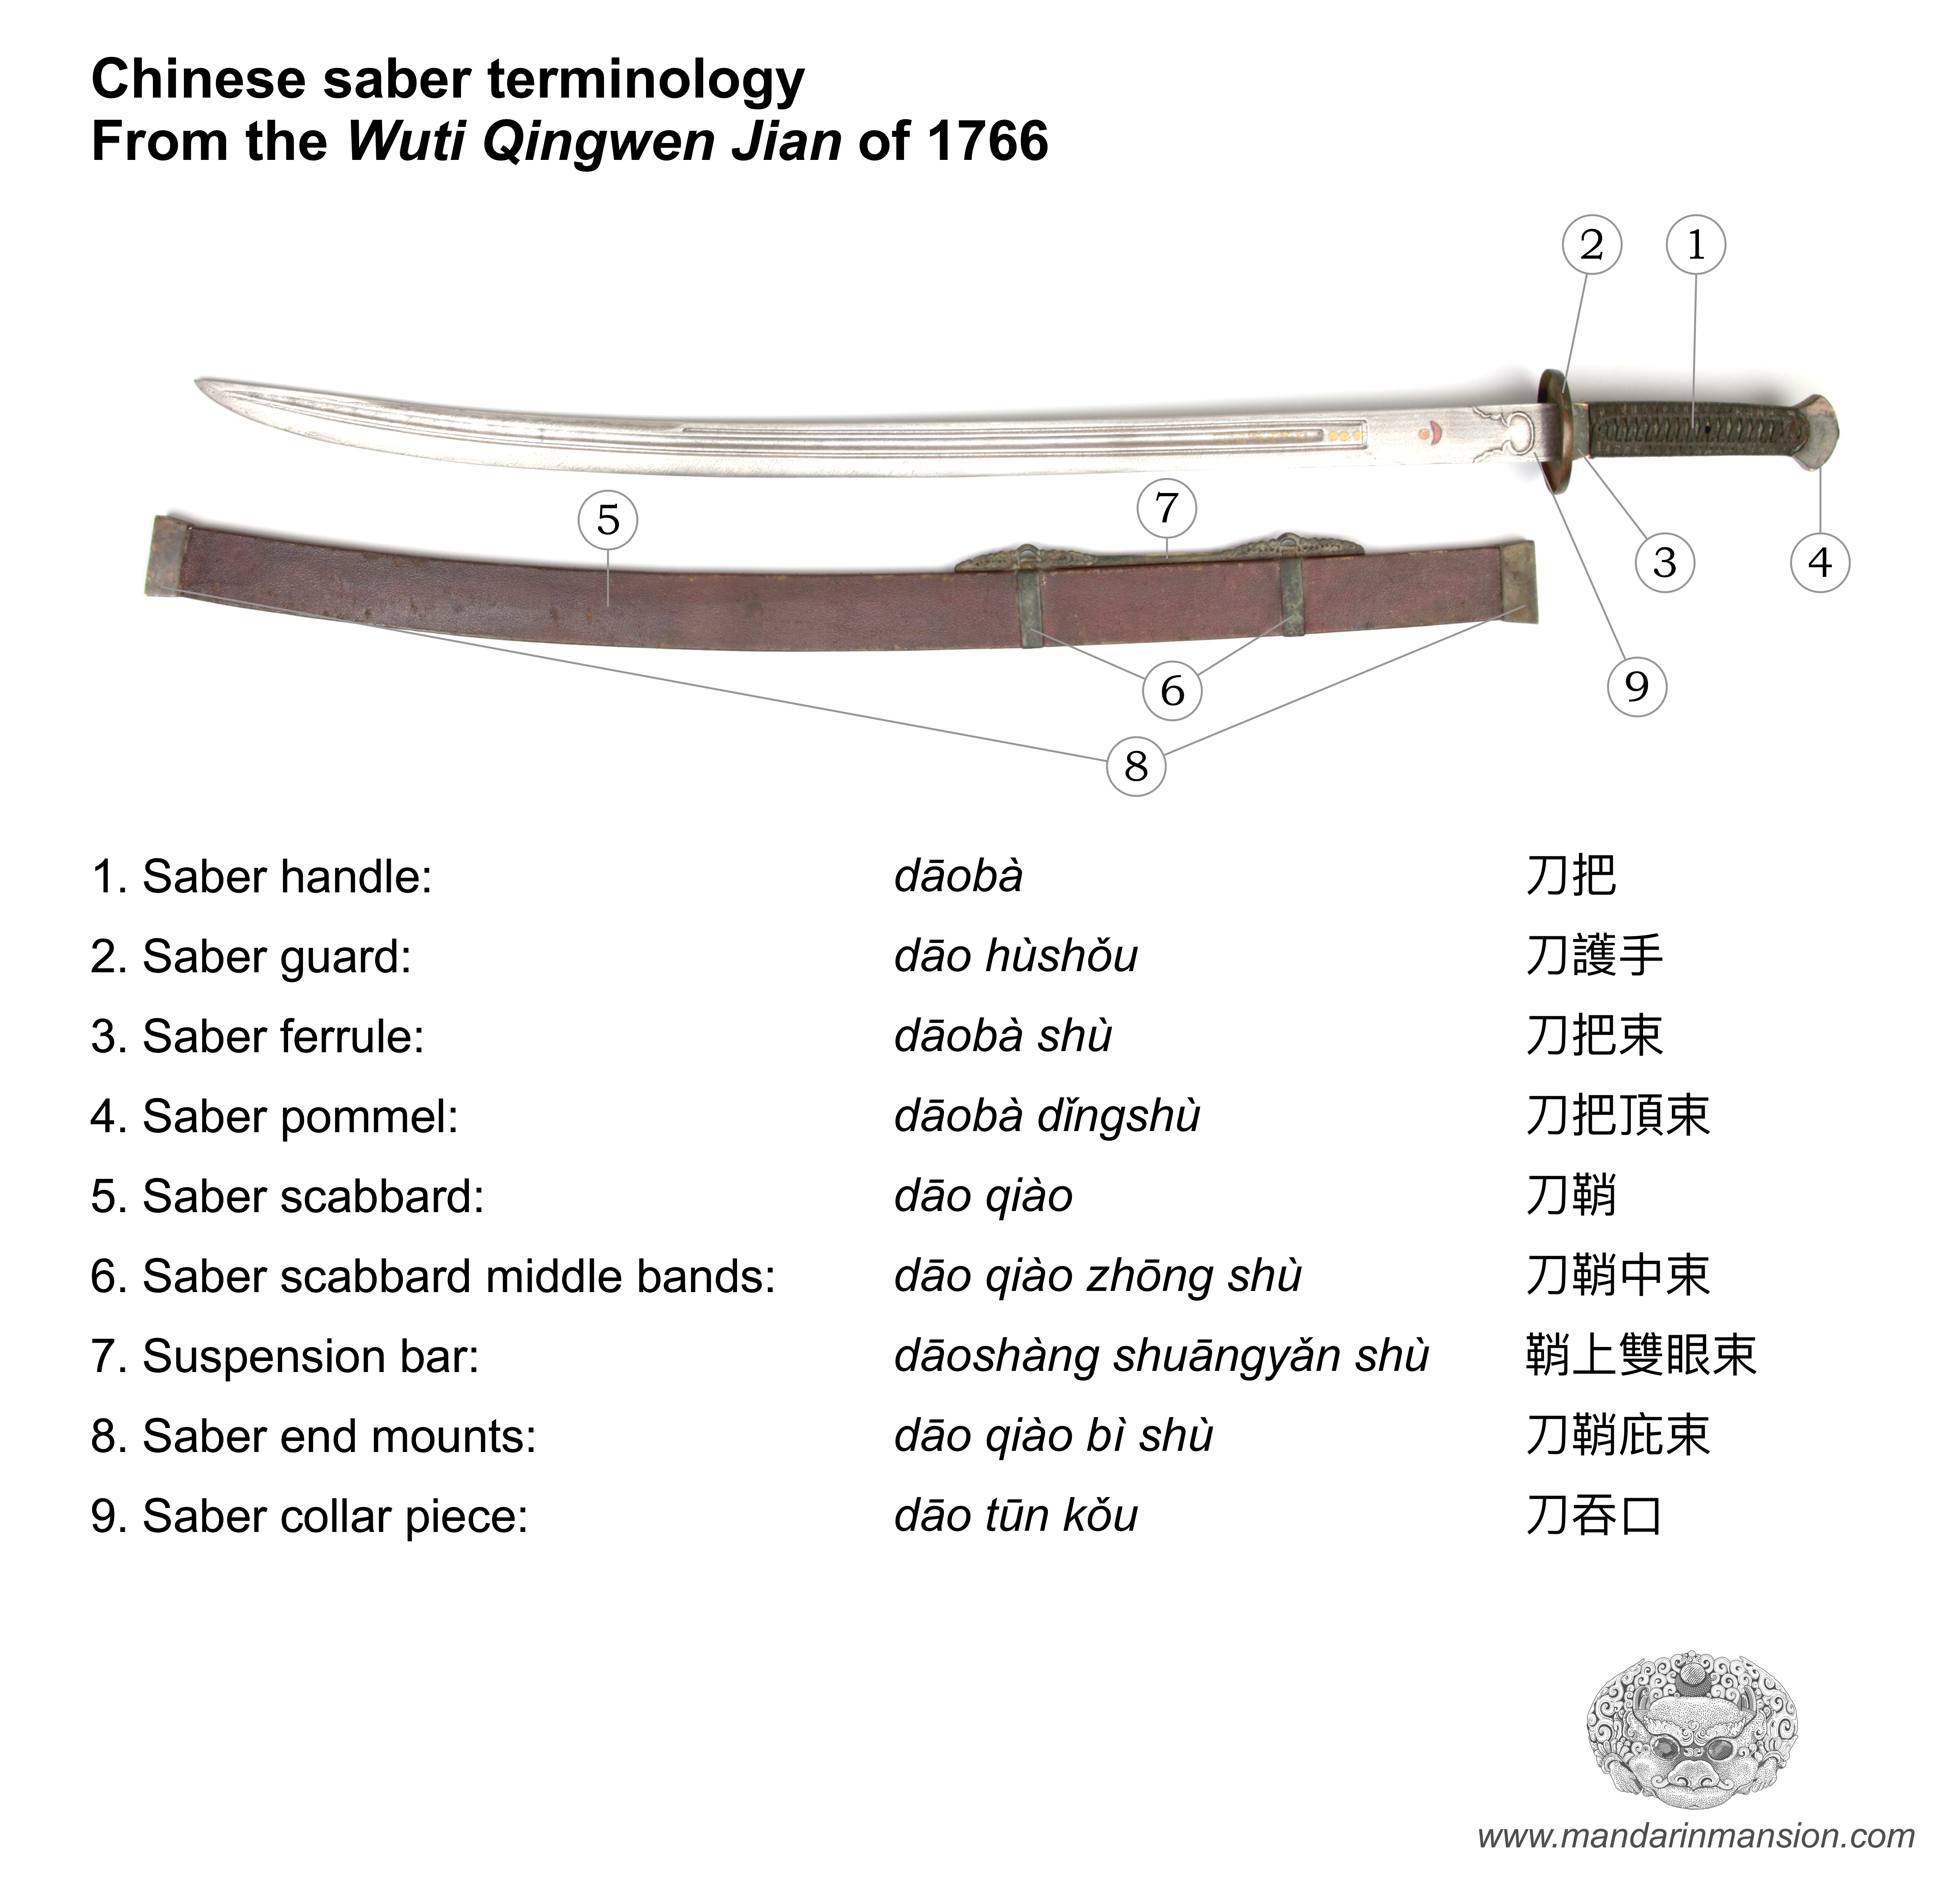 Saber terms of the WTQWJ 1766